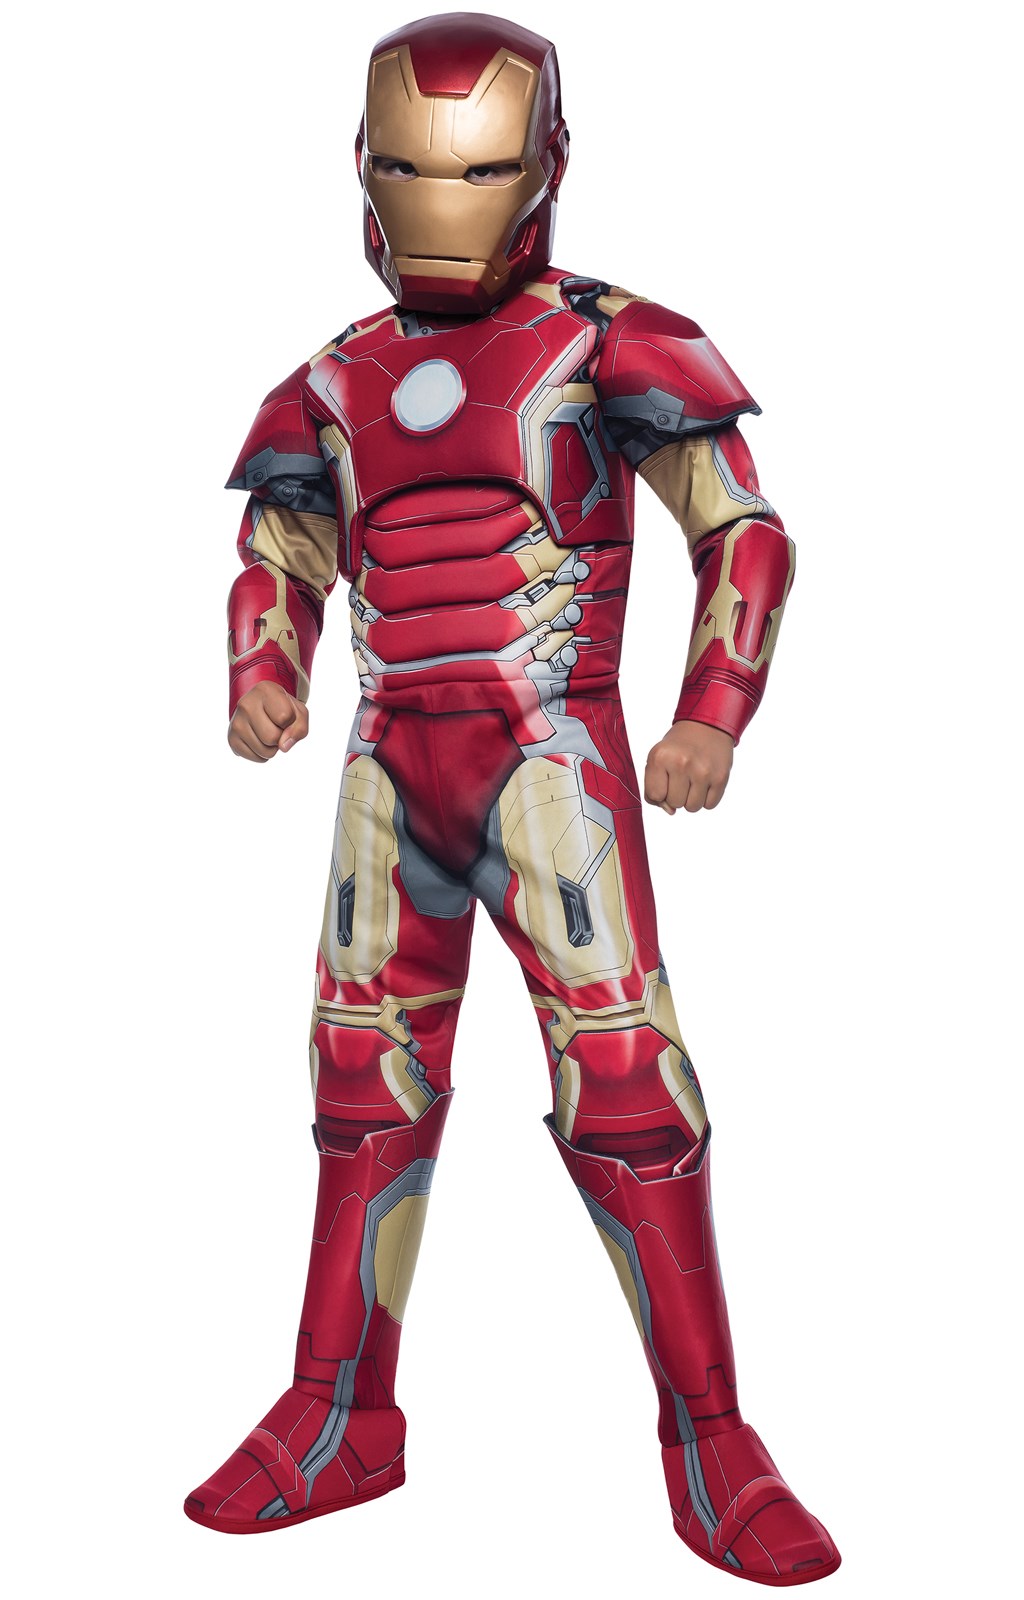 Avengers 2: Age of Ultron Deluxe Iron Man Mark 43 Costume For Kids